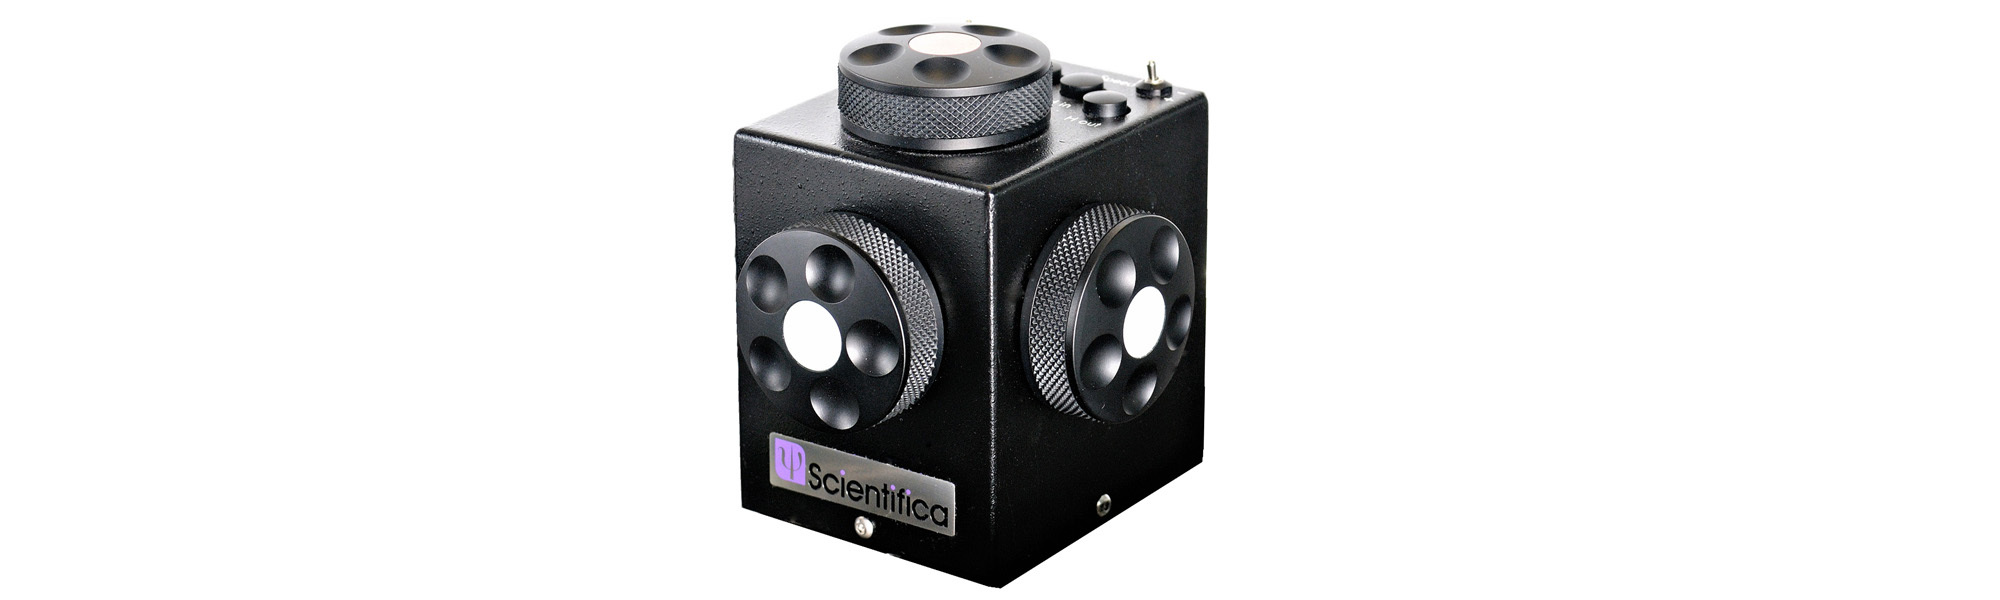 Scientifica offers a range of configurable control options including the control cube and control pad